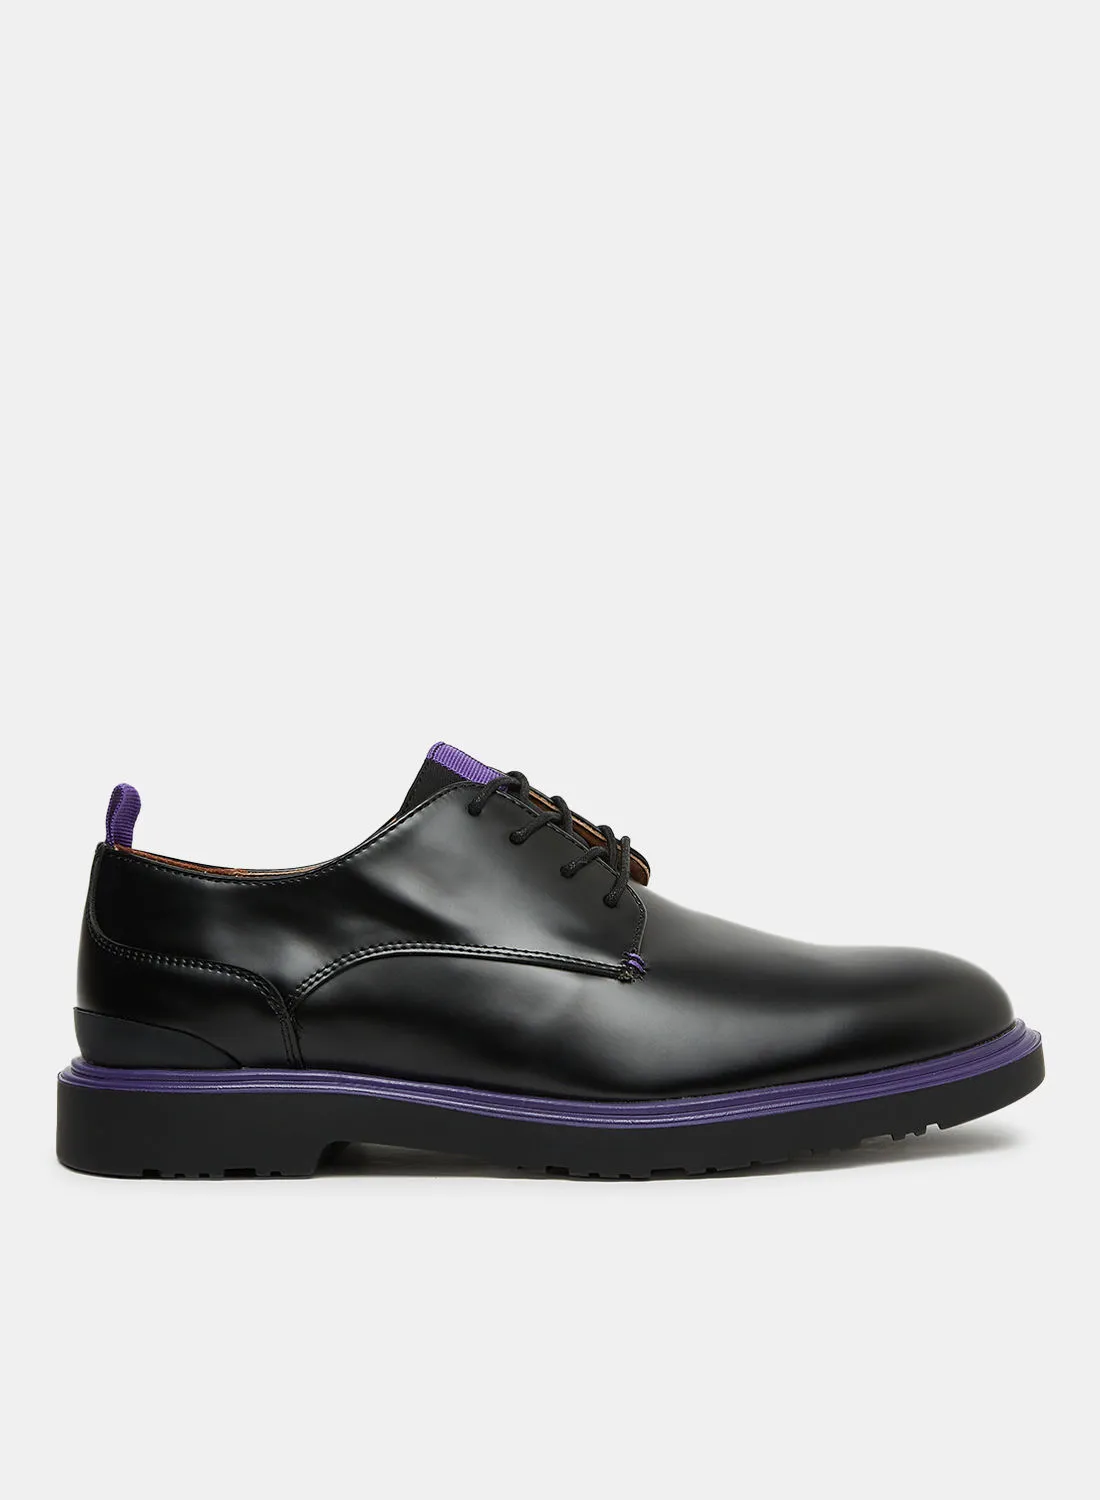 CALL IT SPRING Strata Formal Lace Up Shoes